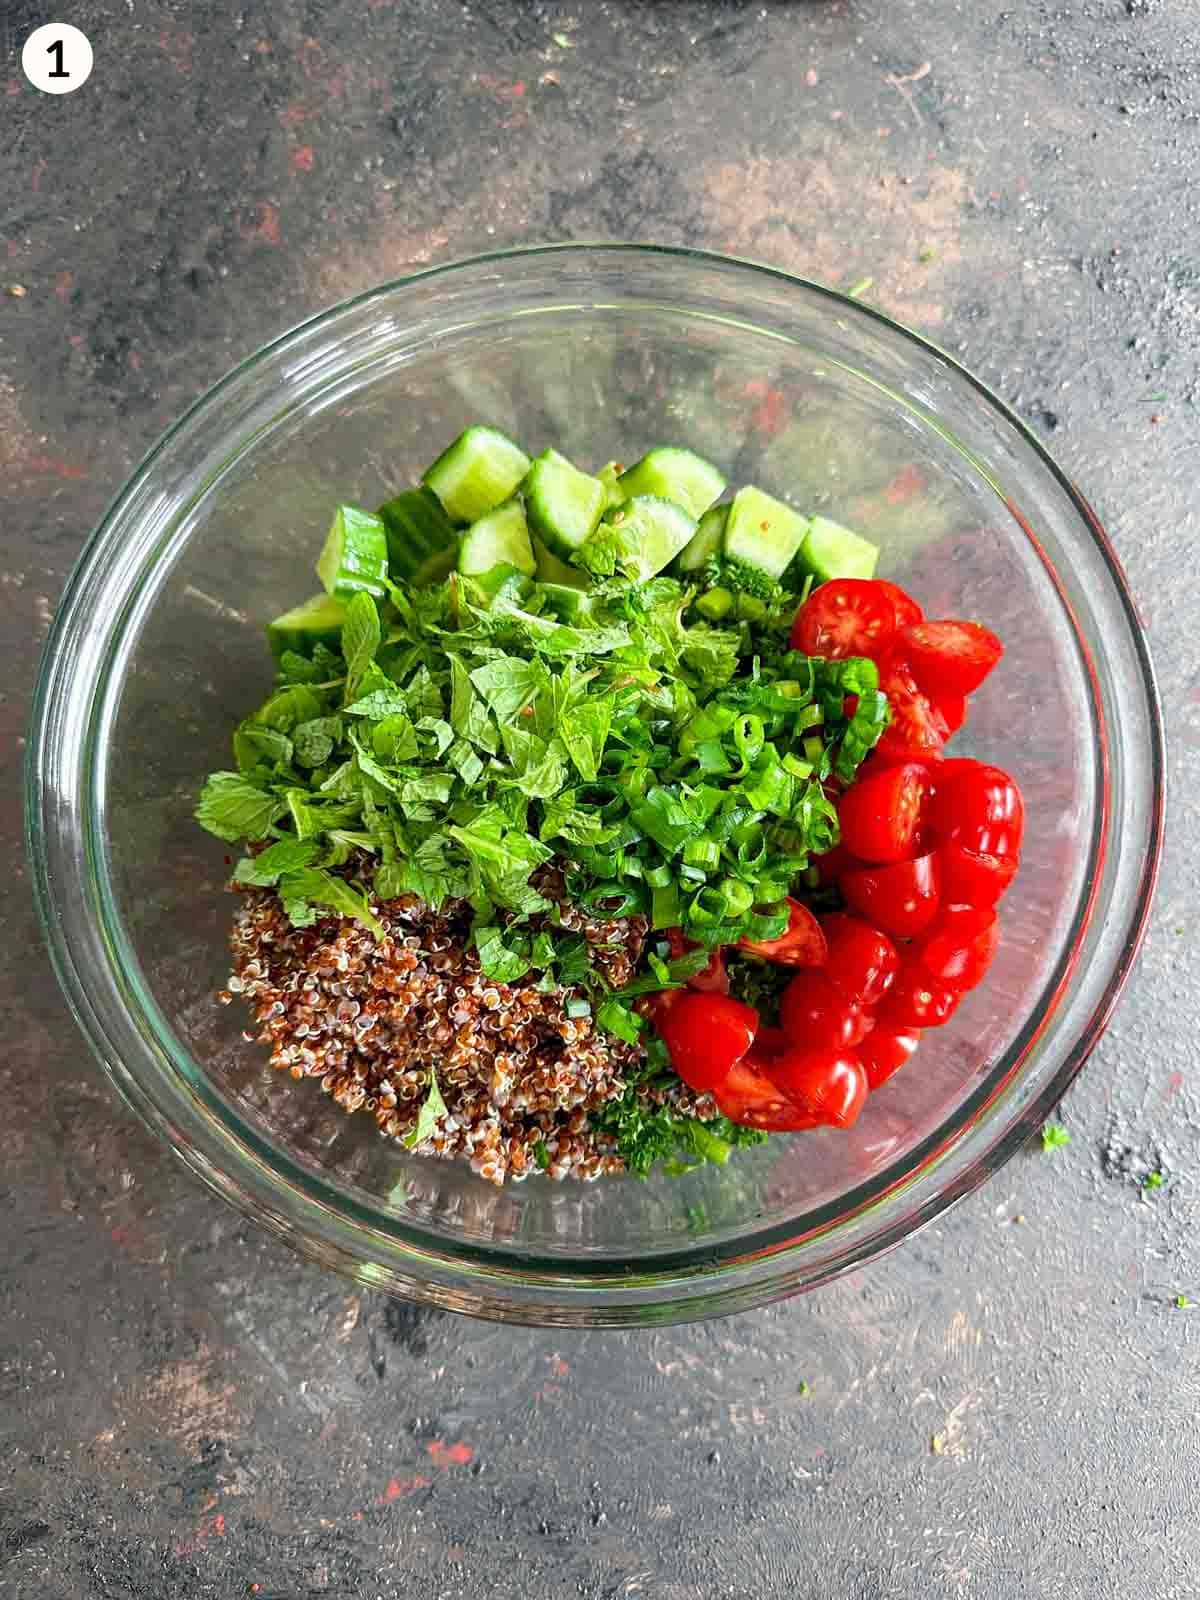 Ingredients for vegan quinoa salad in a mixing bowl